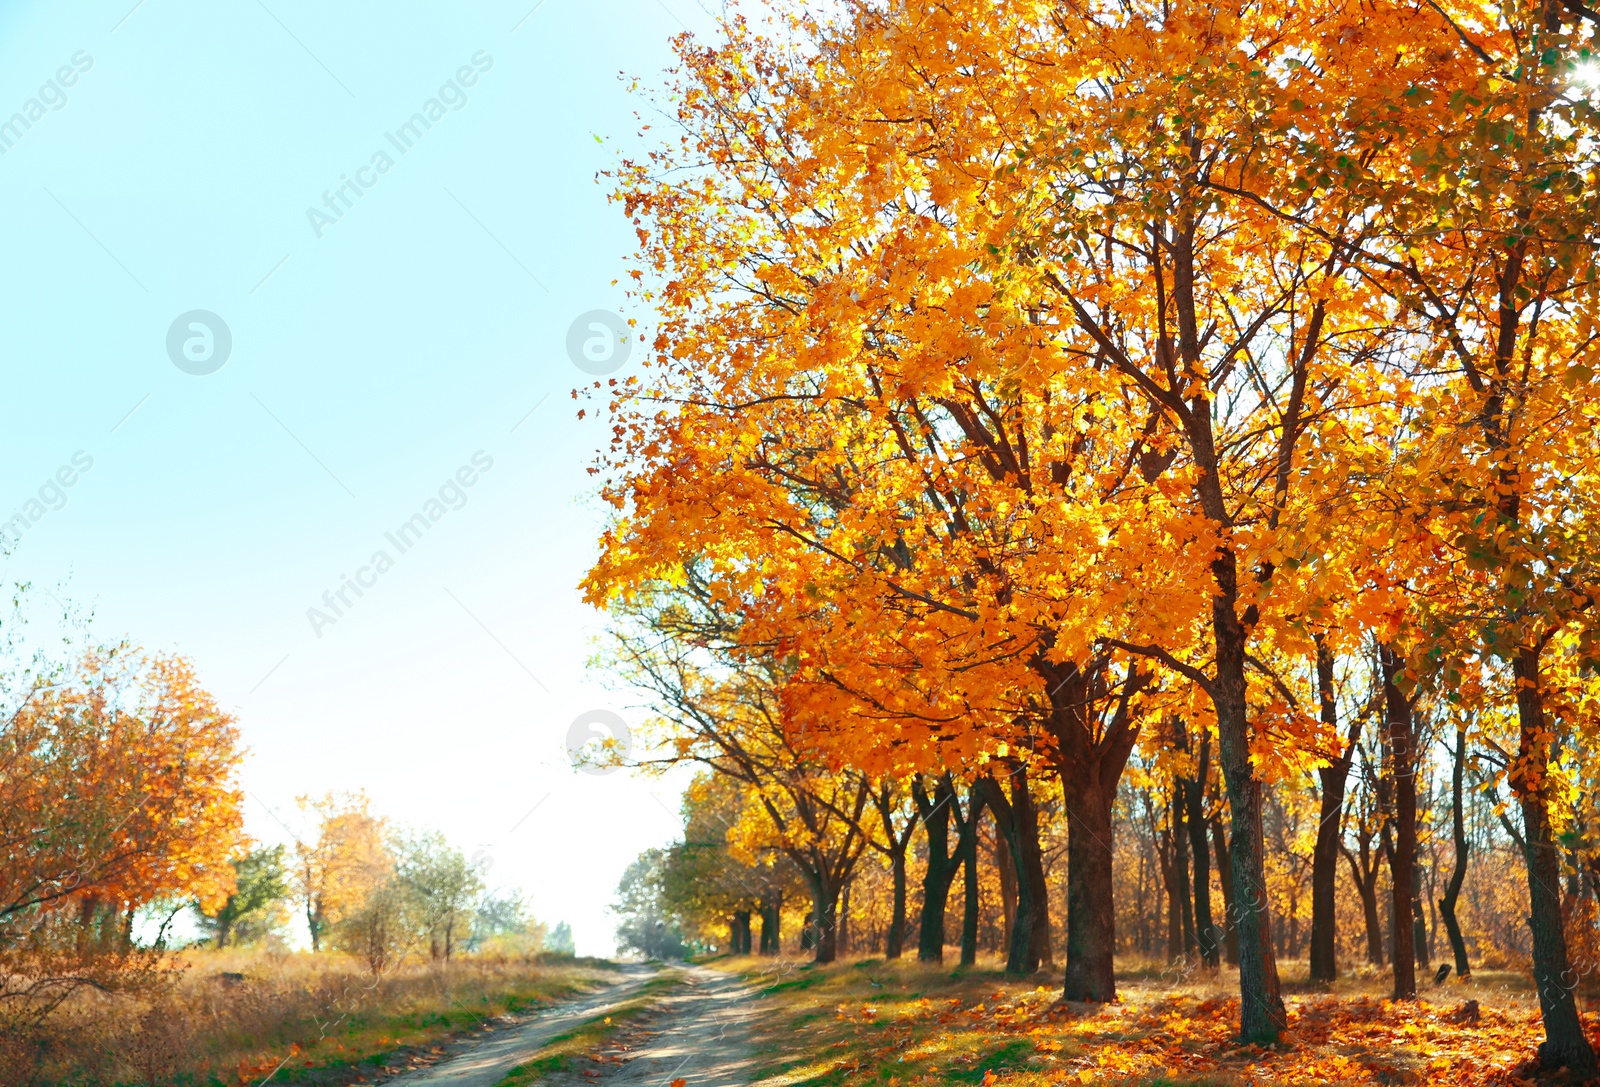 Photo of Beautiful autumn landscape with trees near countryside road and dry leaves on ground